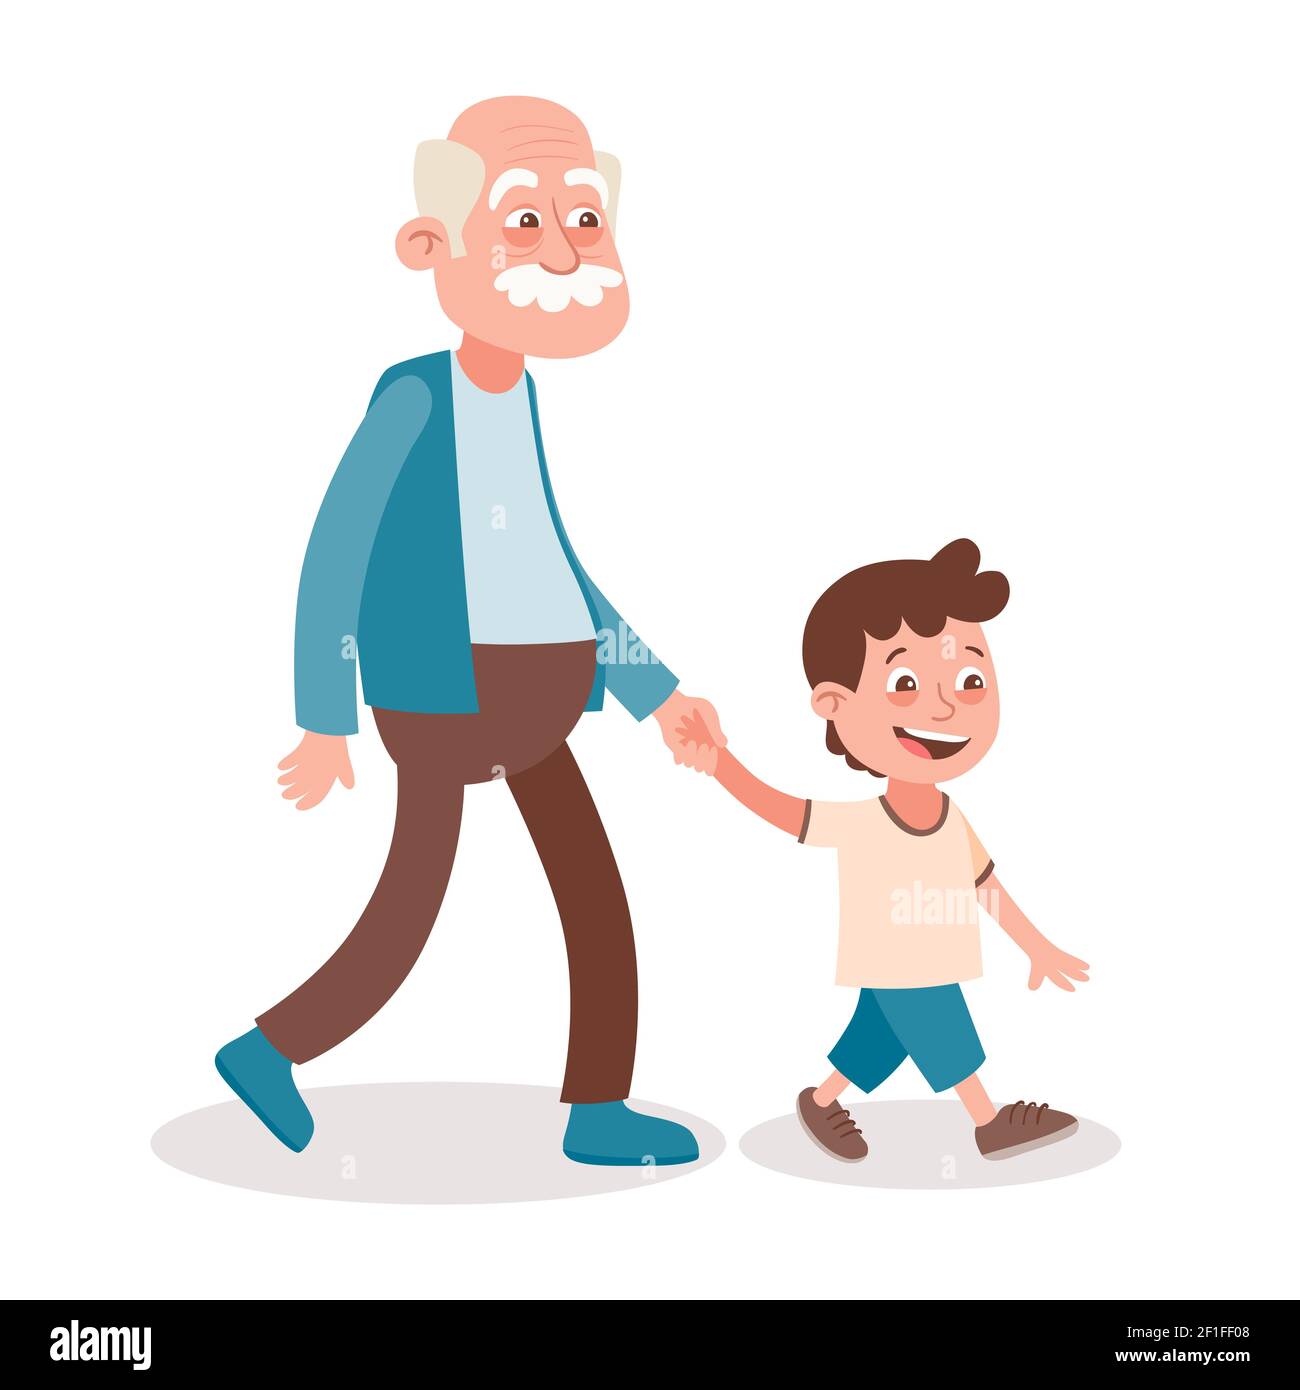 Grandfather and grandson walking, he takes him by the hand. Cartoon style, isolated on white background. Vector illustration. Stock Vector